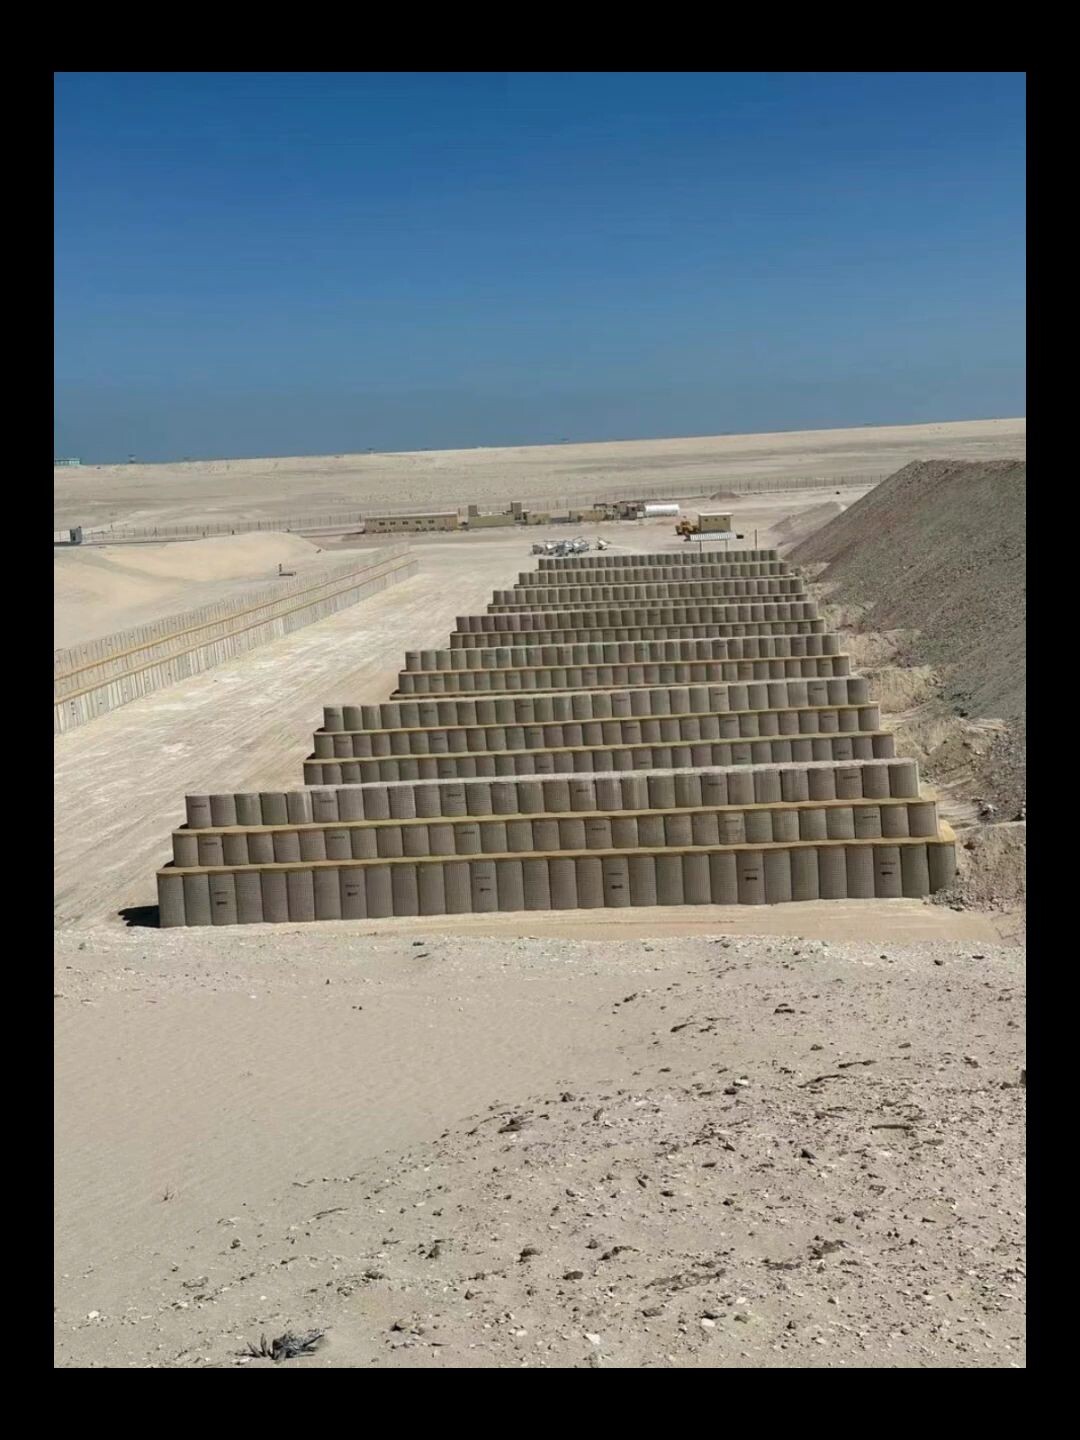 A police shooting range in Abu Dhabi constructed entirely using JOESCO military barriers. thumbnail 1